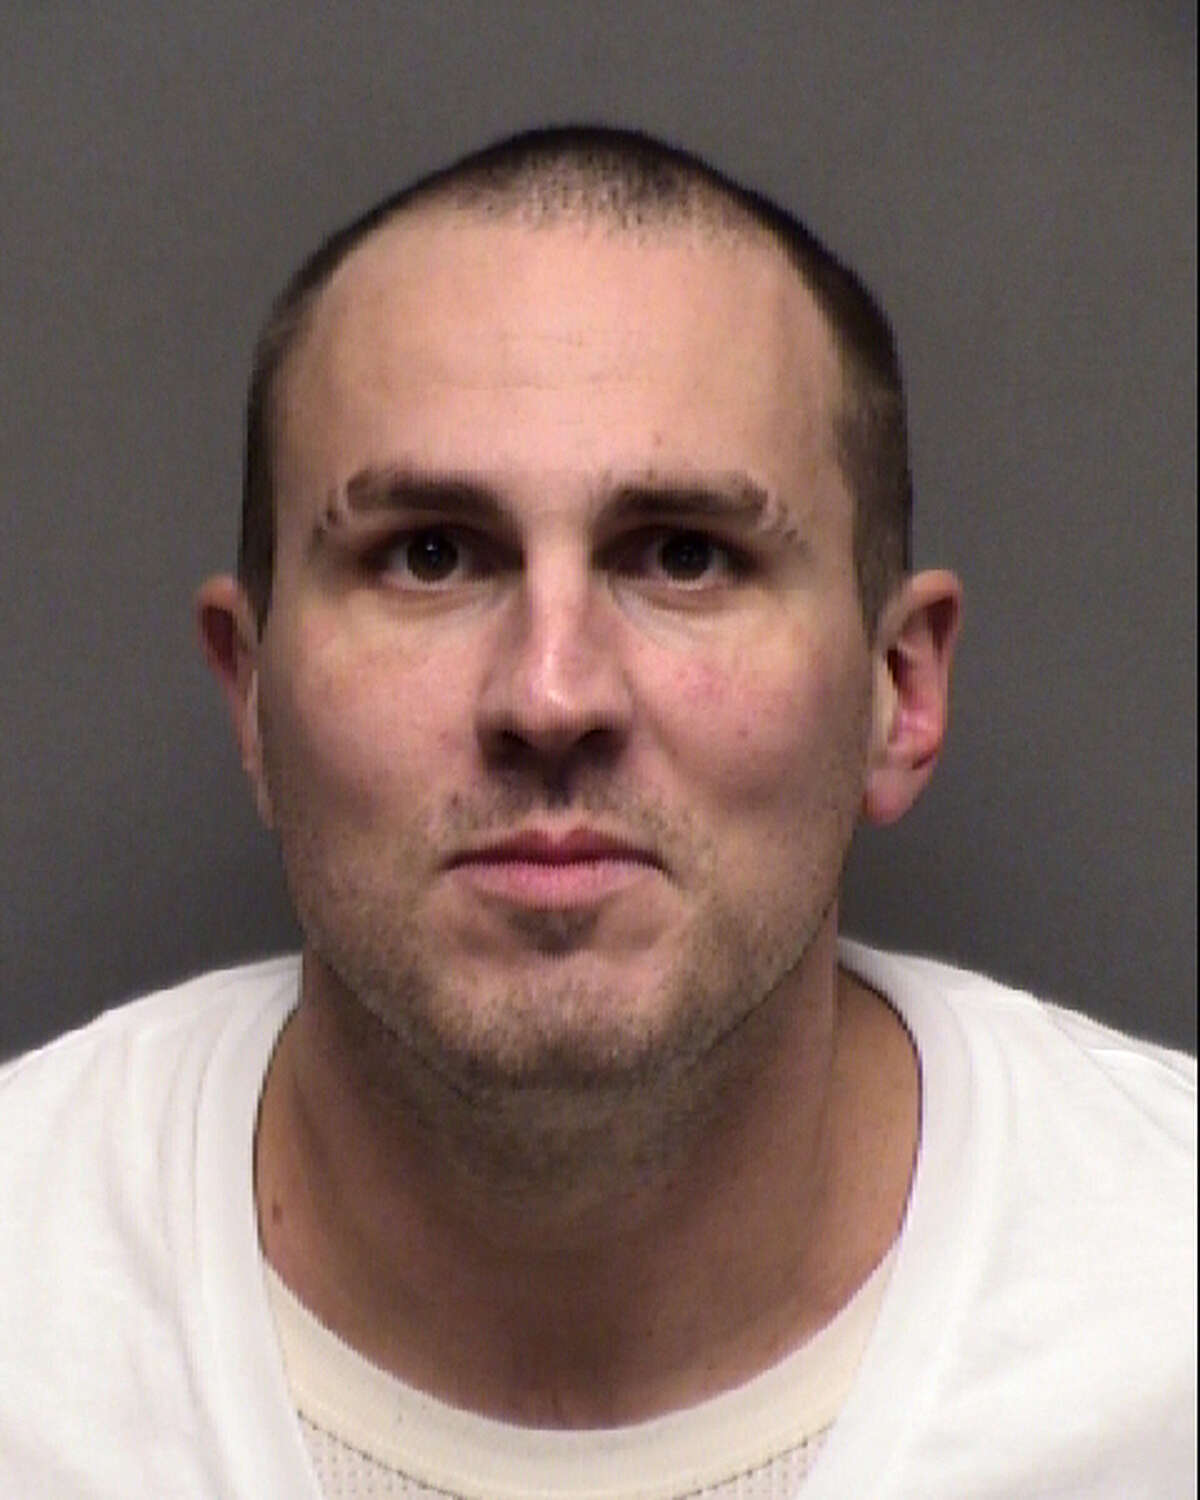 An inmate was mistakenly freed Bexar County Jail officials mistakenly freed 32-year-old Andrew Taylor Ford in January 2019. When he was booked, jailers overlooked an order to hold Ford on a charge out of San Patricio County, according to the sheriff's office. He was released on Jan. 3 after his charge in Bexar County was dismissed.